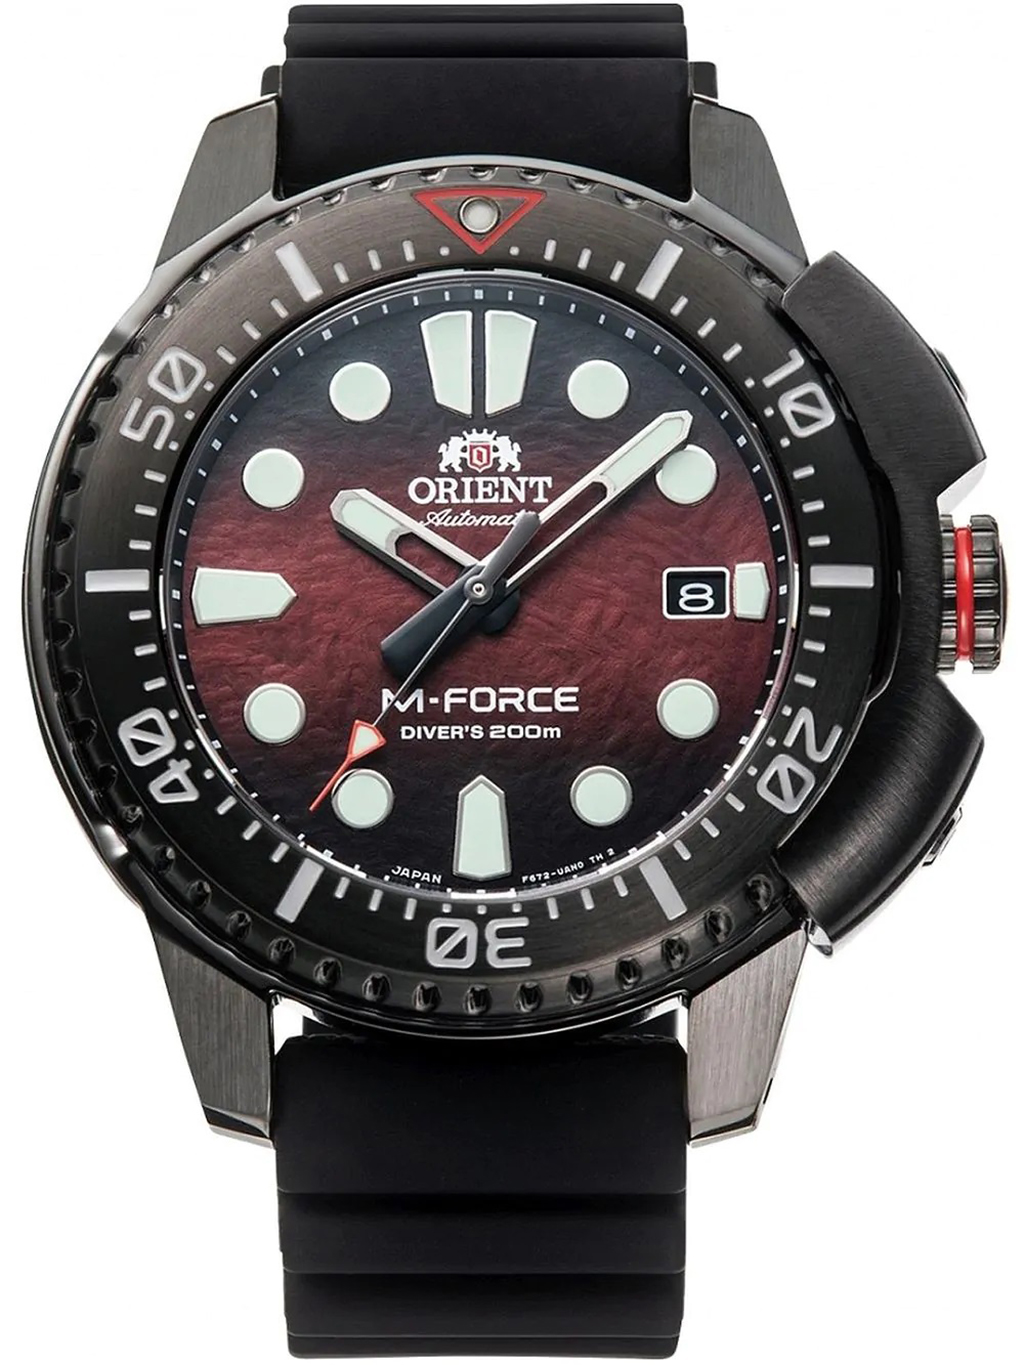 ORIENT M-Force Automatic Limited Edition lifestyle